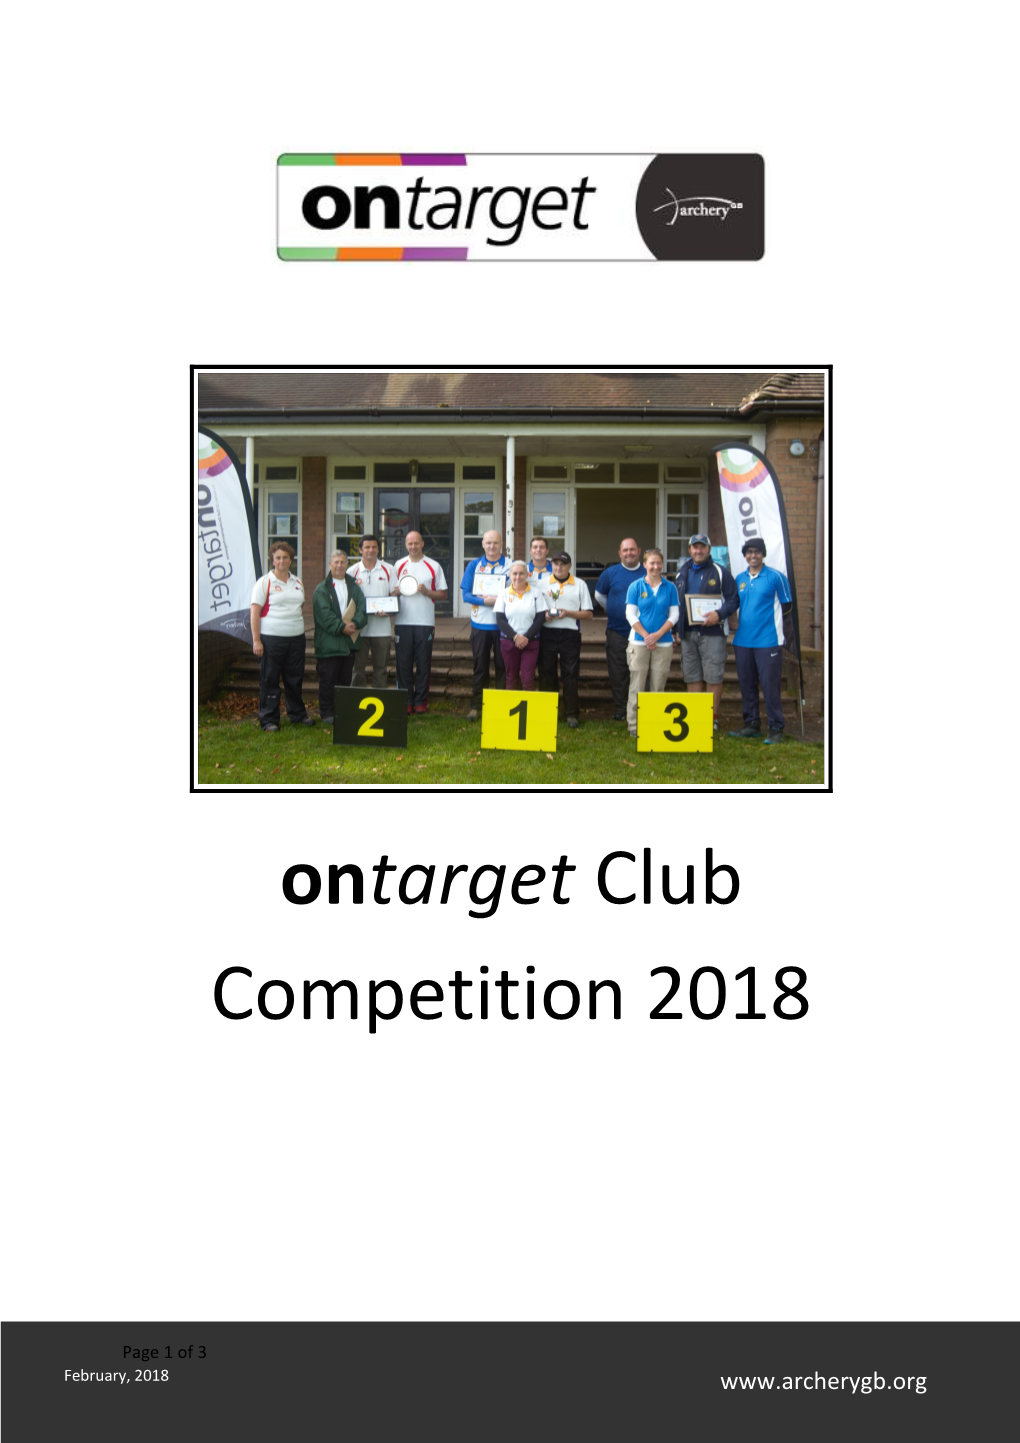 Ontargetclub Competition 2018